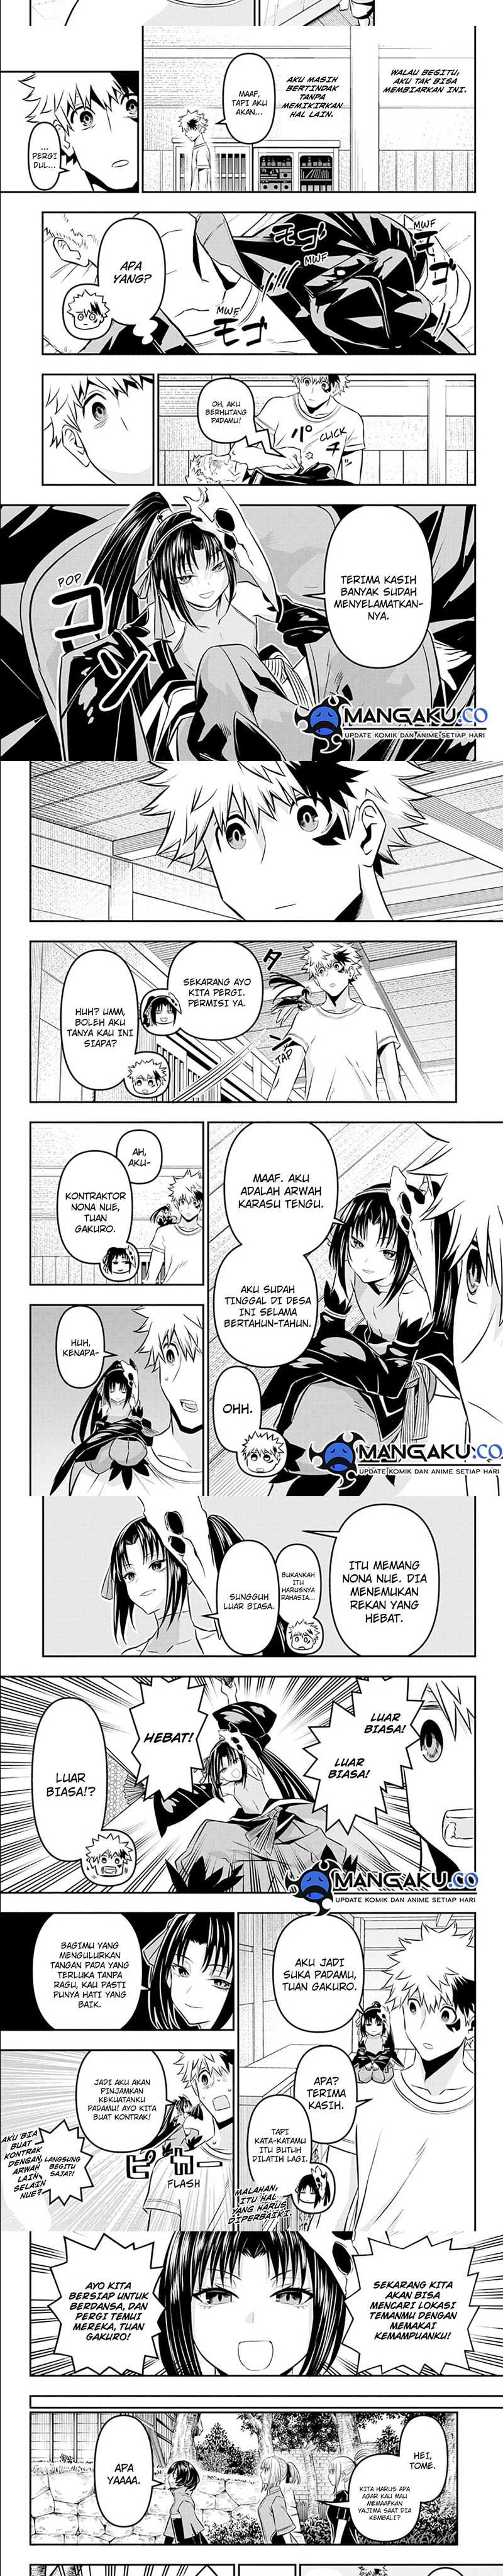 Nue’s Exorcist Chapter 32